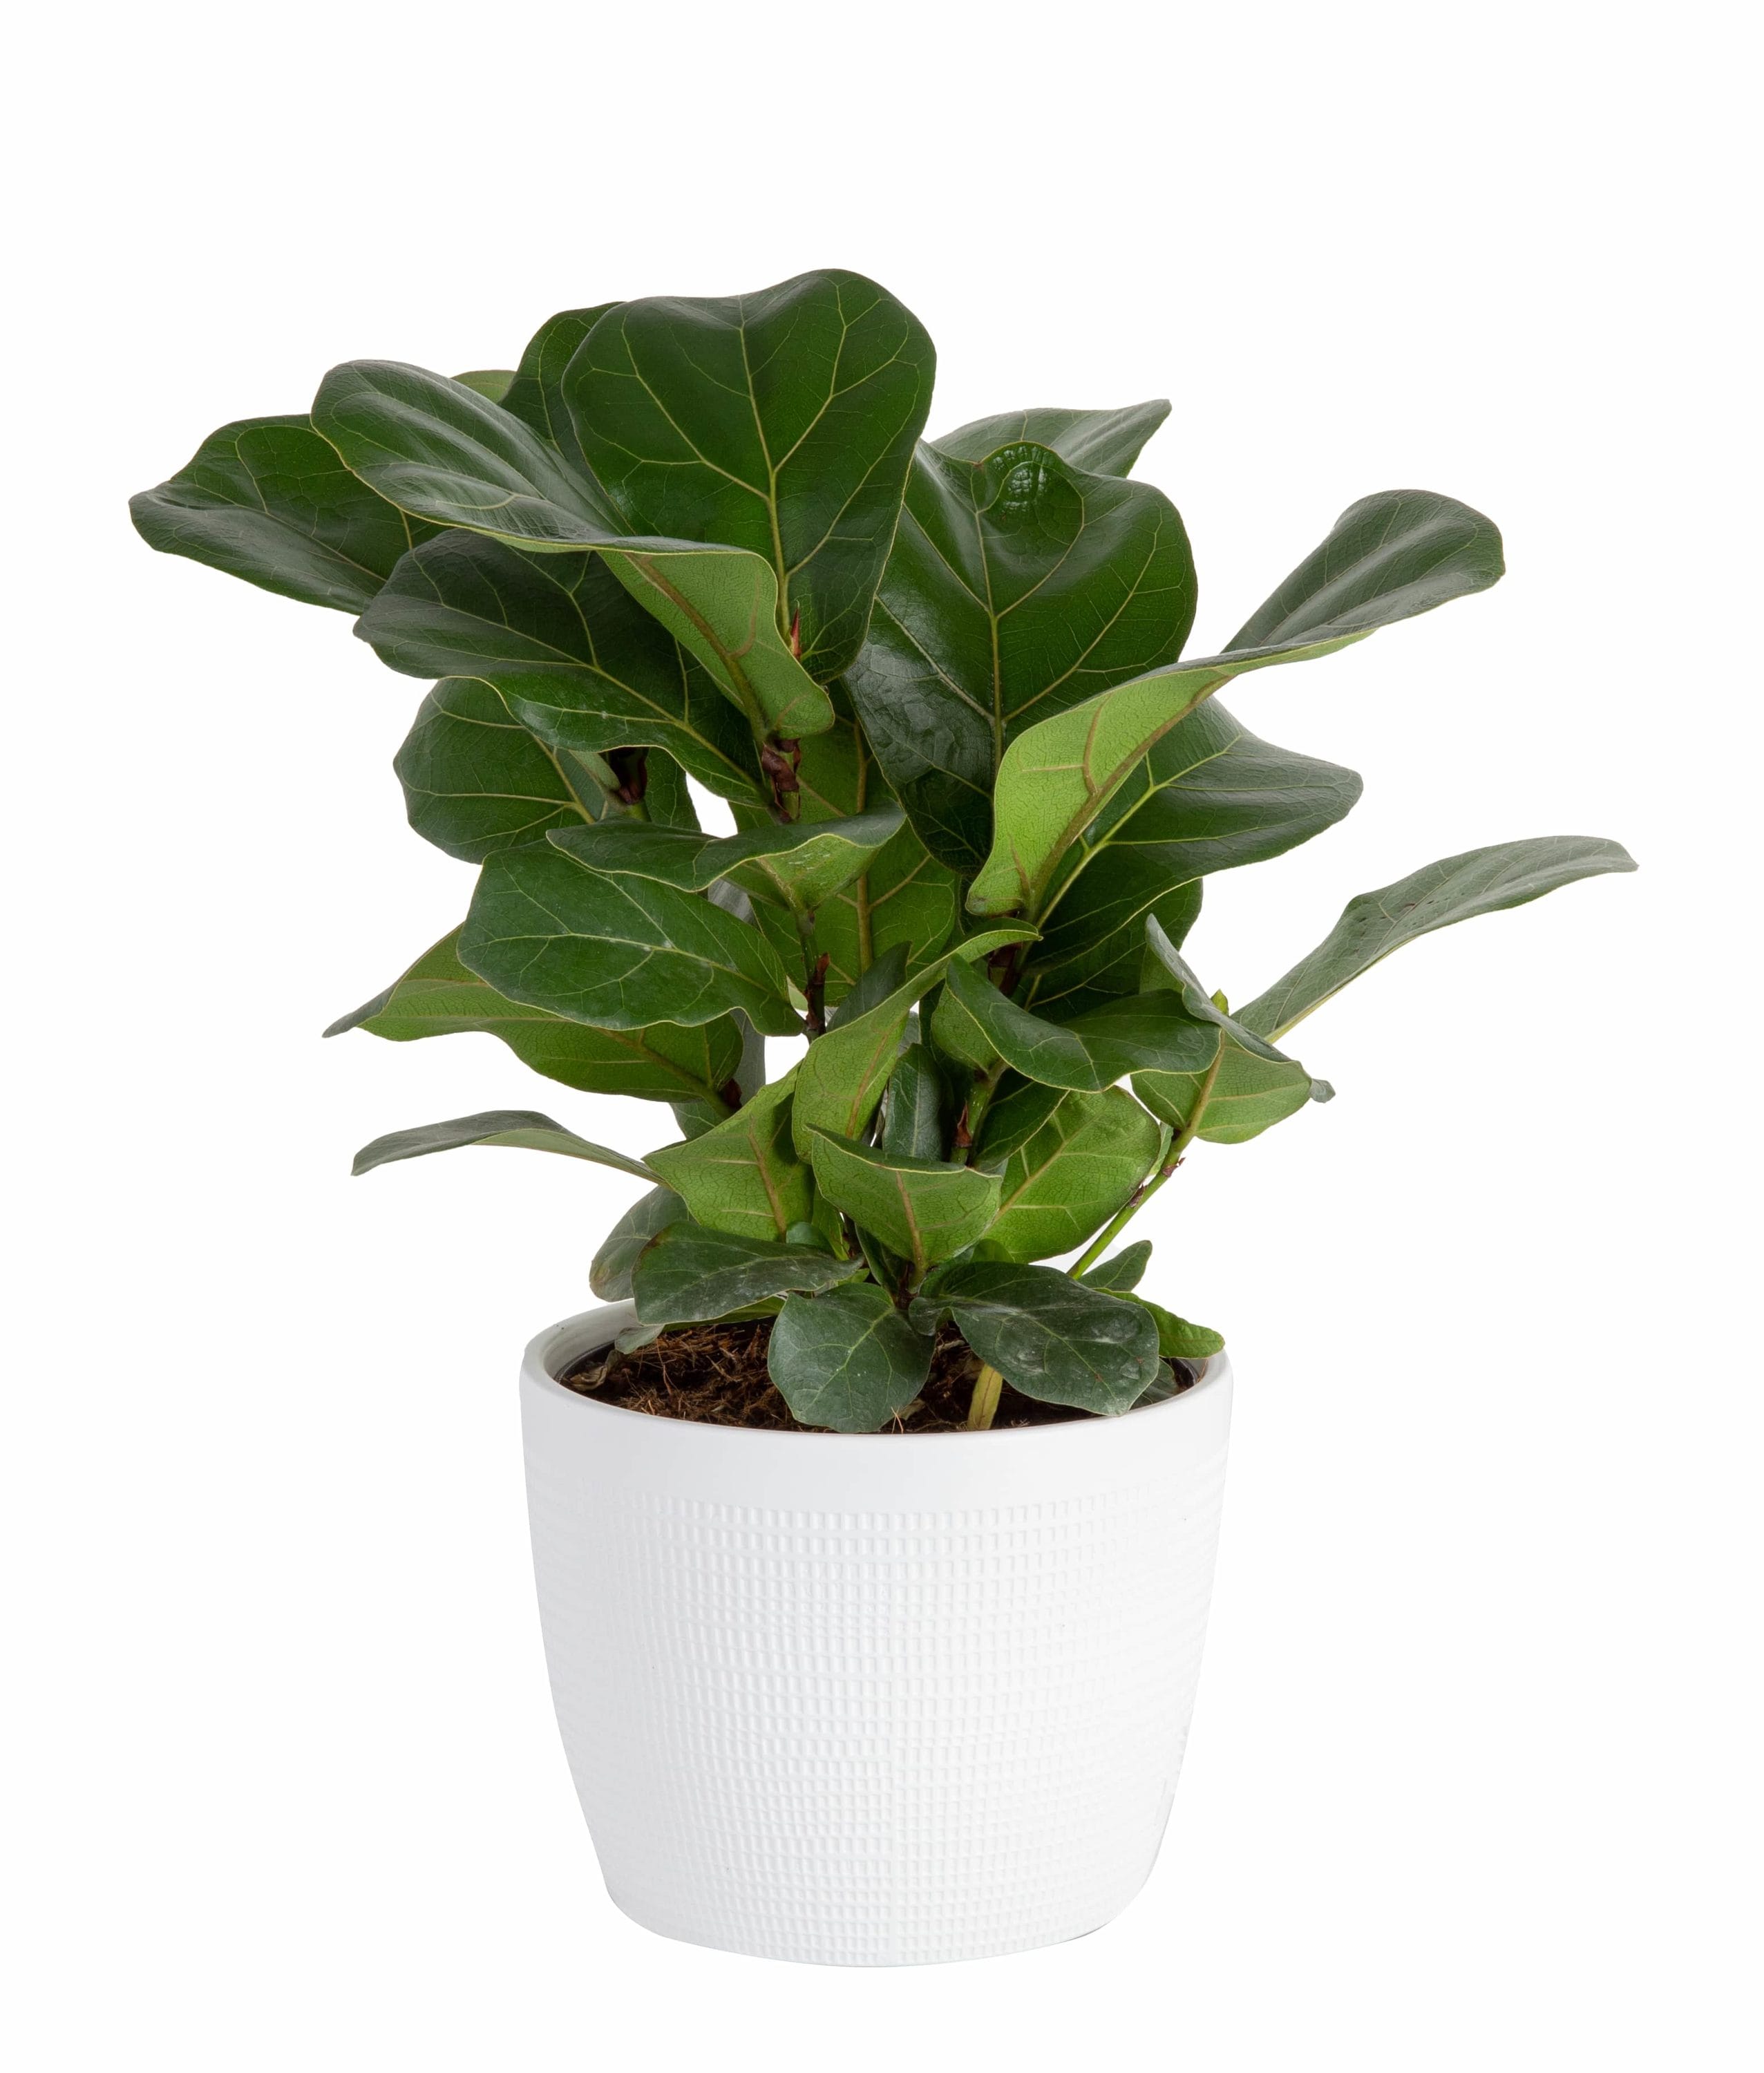 Costa Farms Little Fiddle Leaf Fig in 6-in Ceramic Planter in the House ...